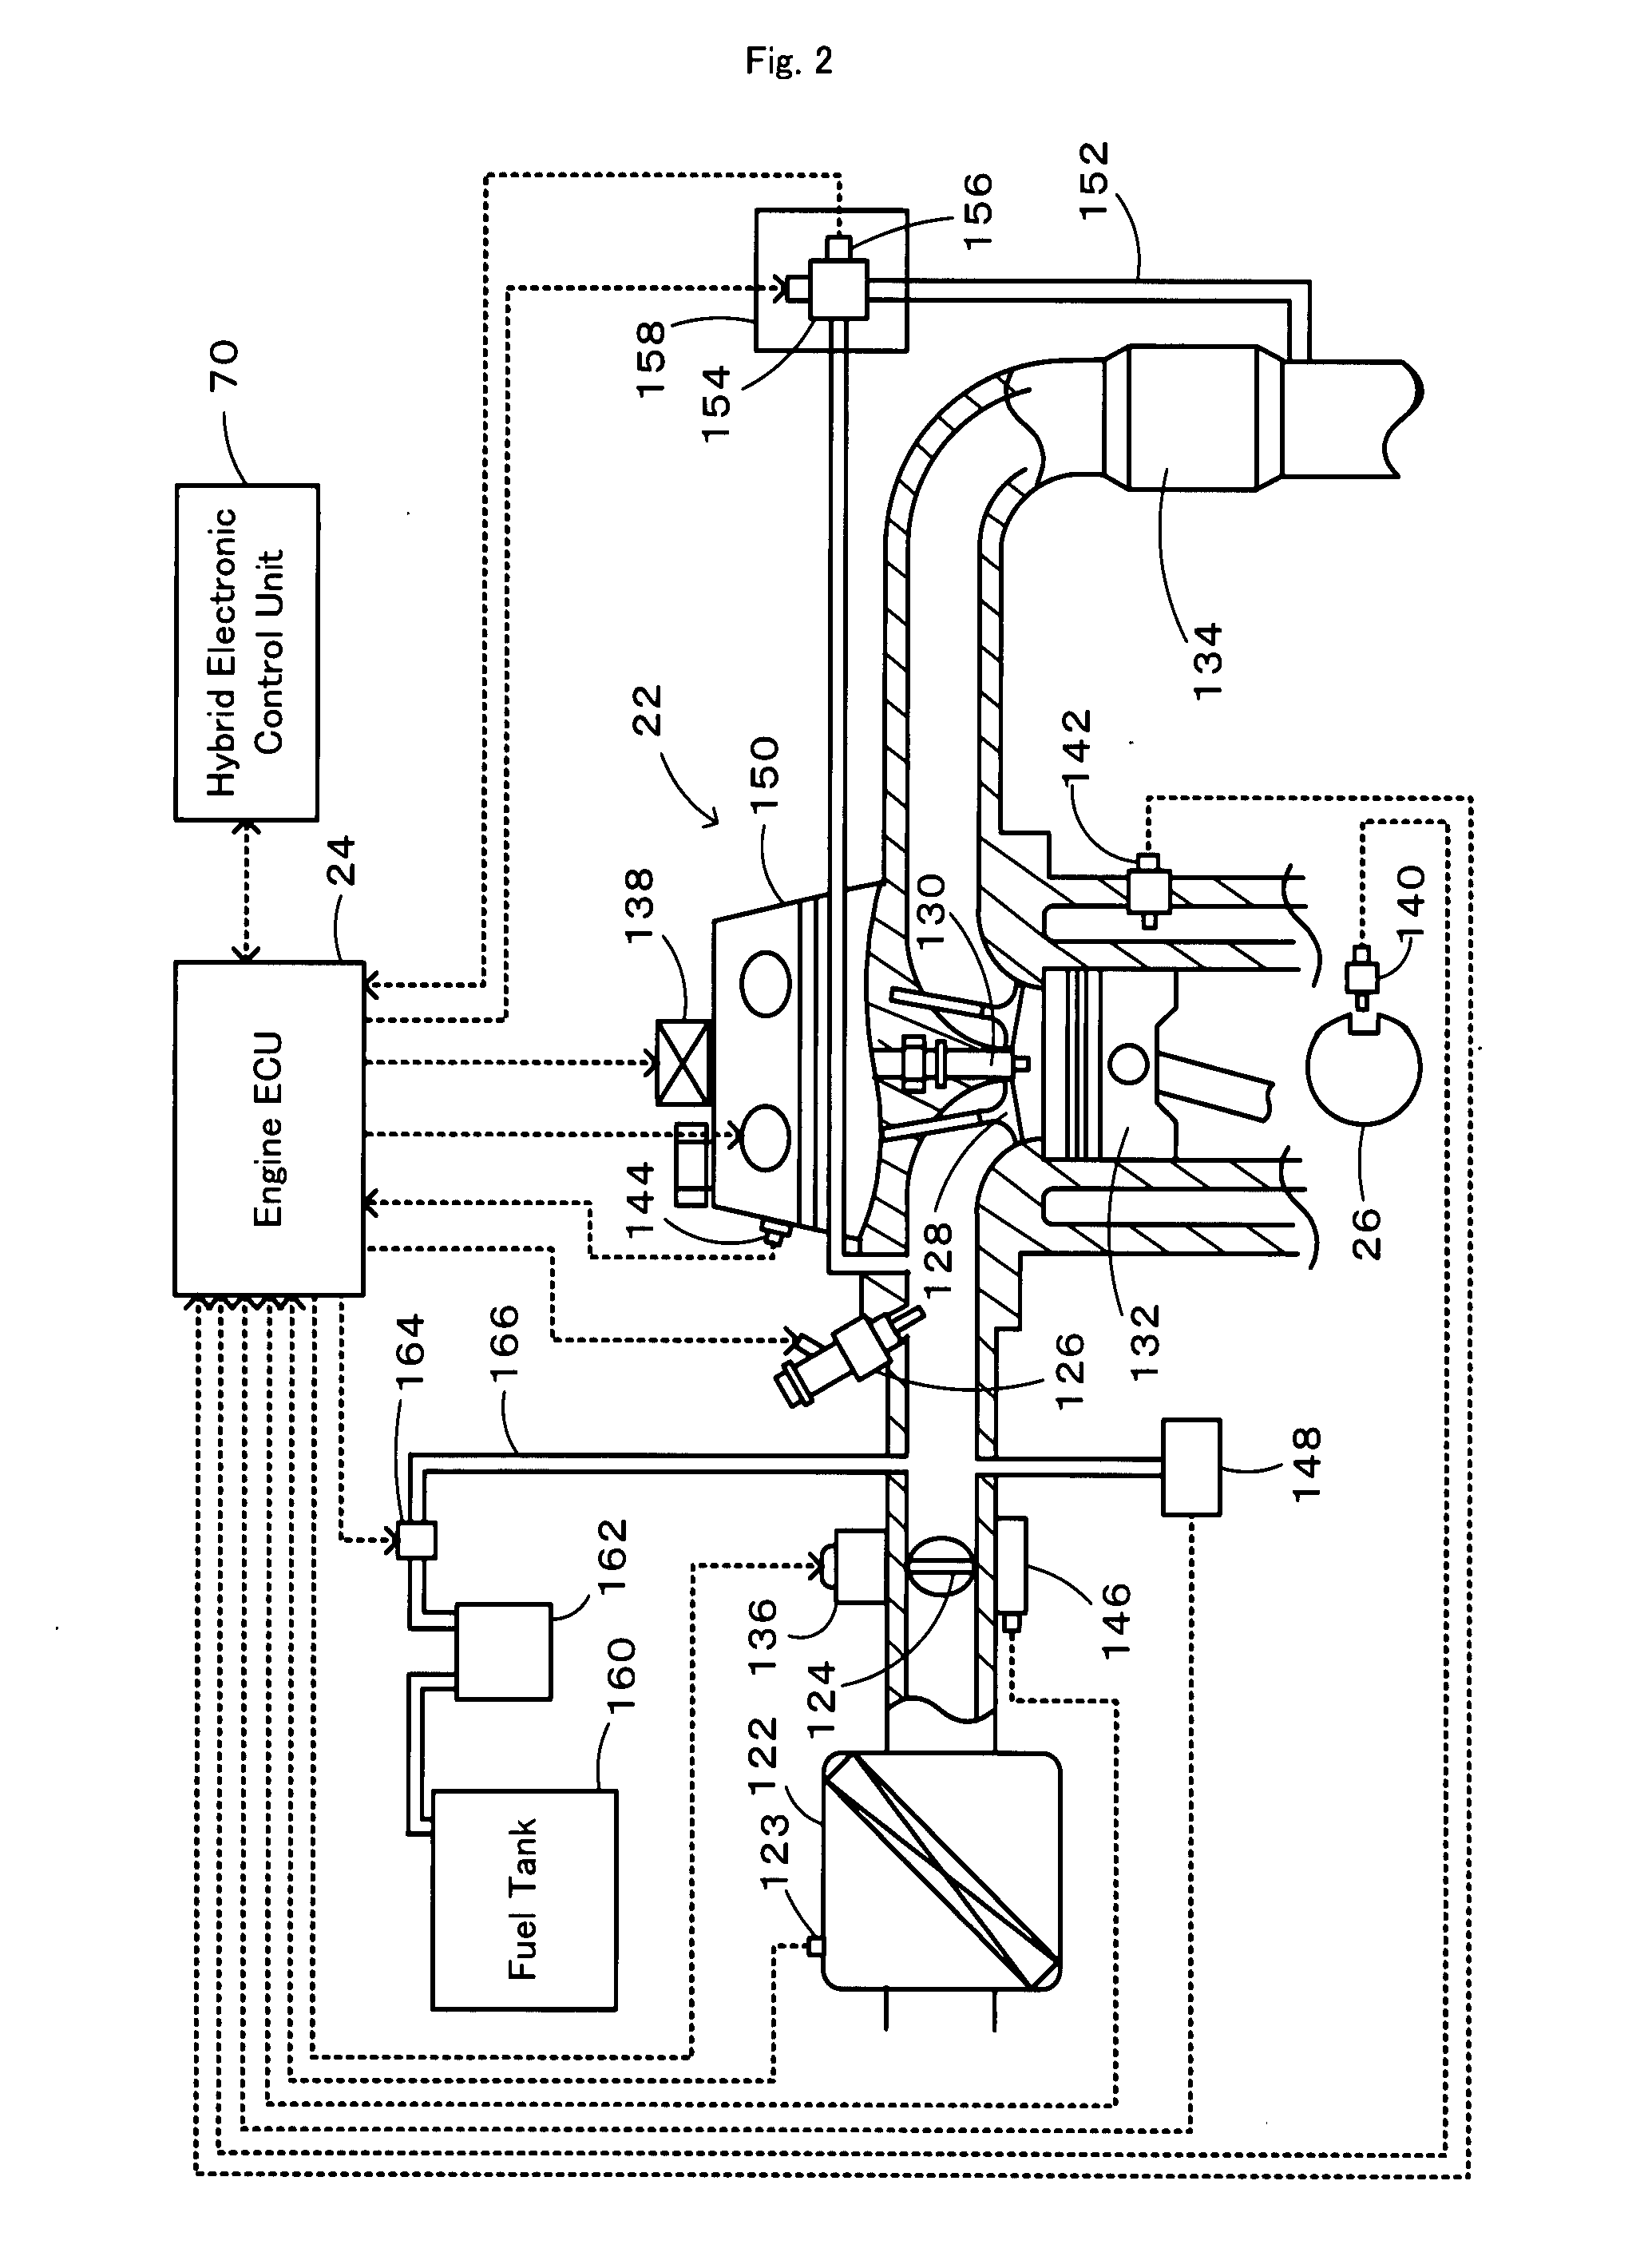 Motor Vehicle and Control Method of Internal Combustion Engine